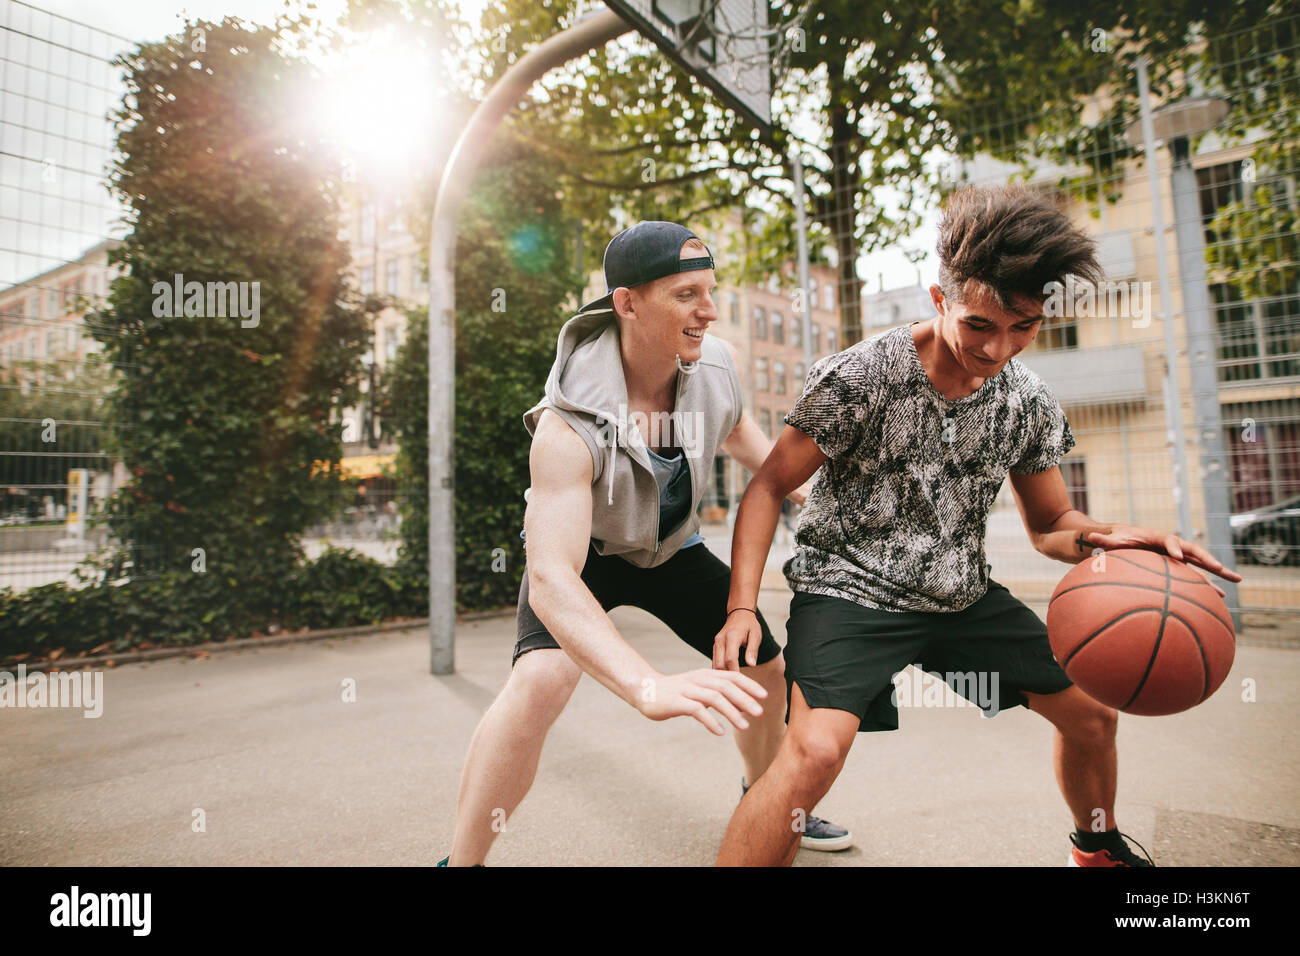 Two young friends playing basketball on court outdoors and having fun. Streetball players having a basketball game. Stock Photo